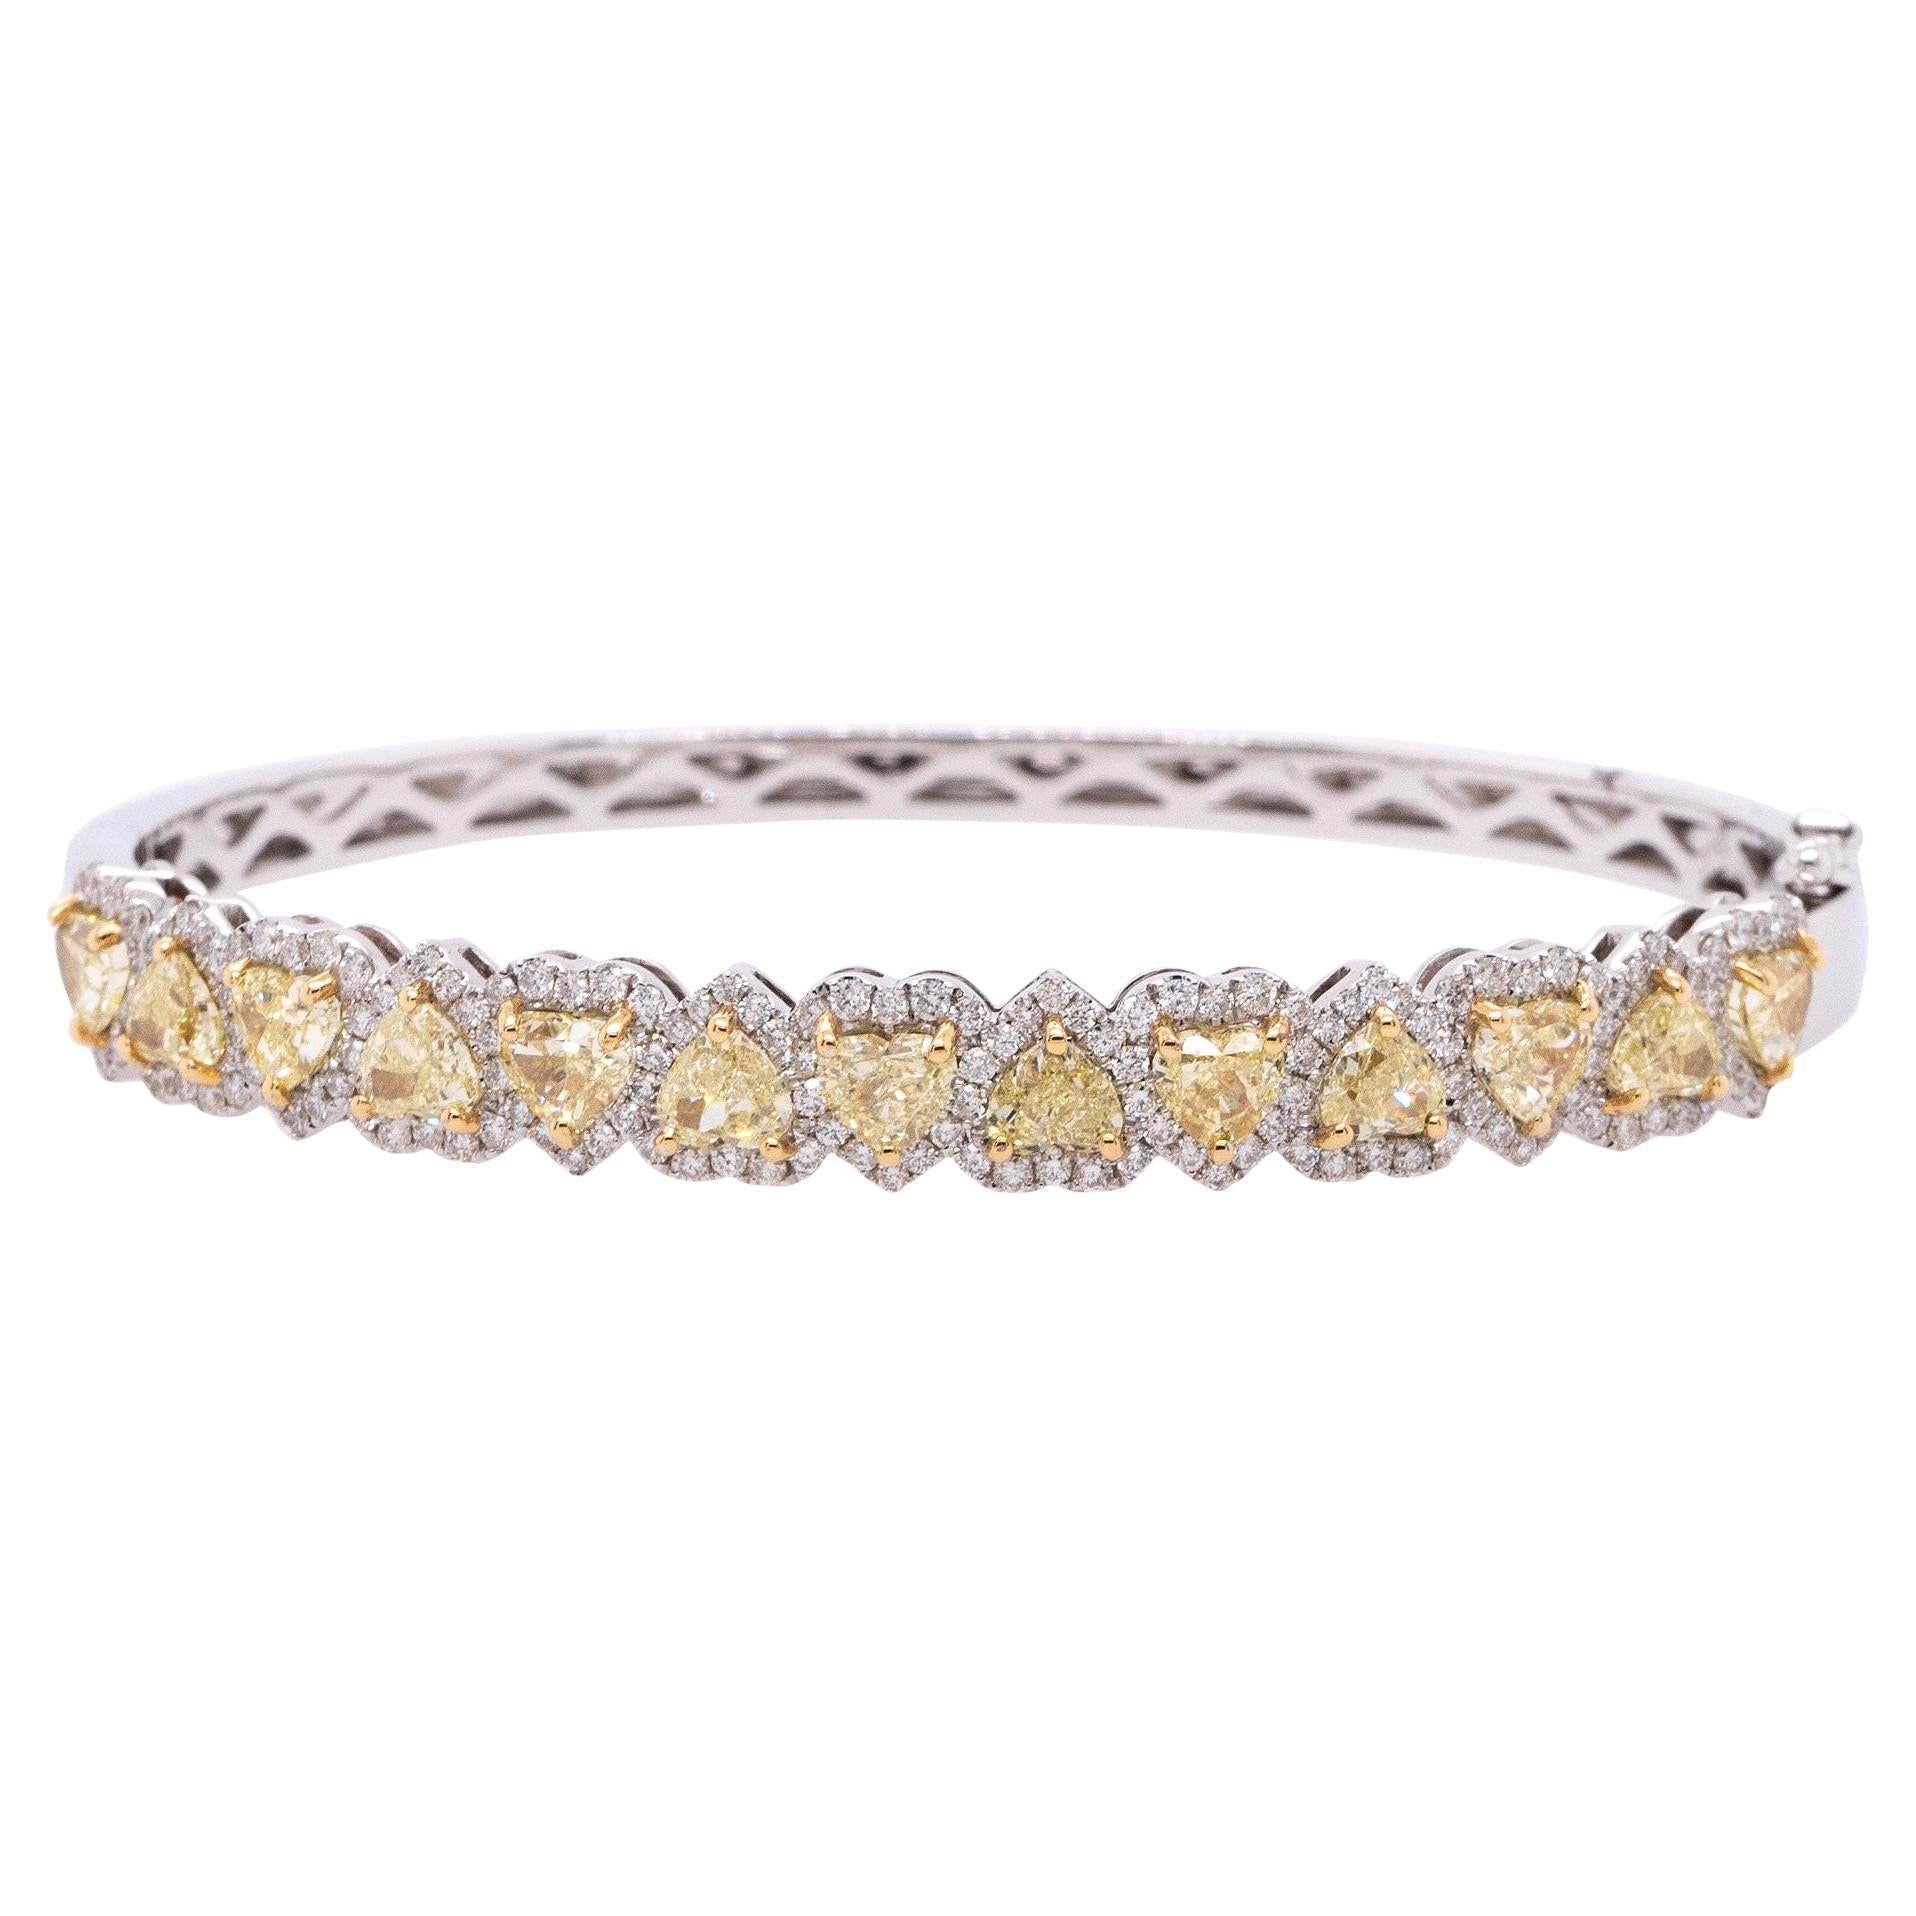 5.56 Carat Natural Fancy Heart & Round Cut Diamond Pave Bangle For Sale